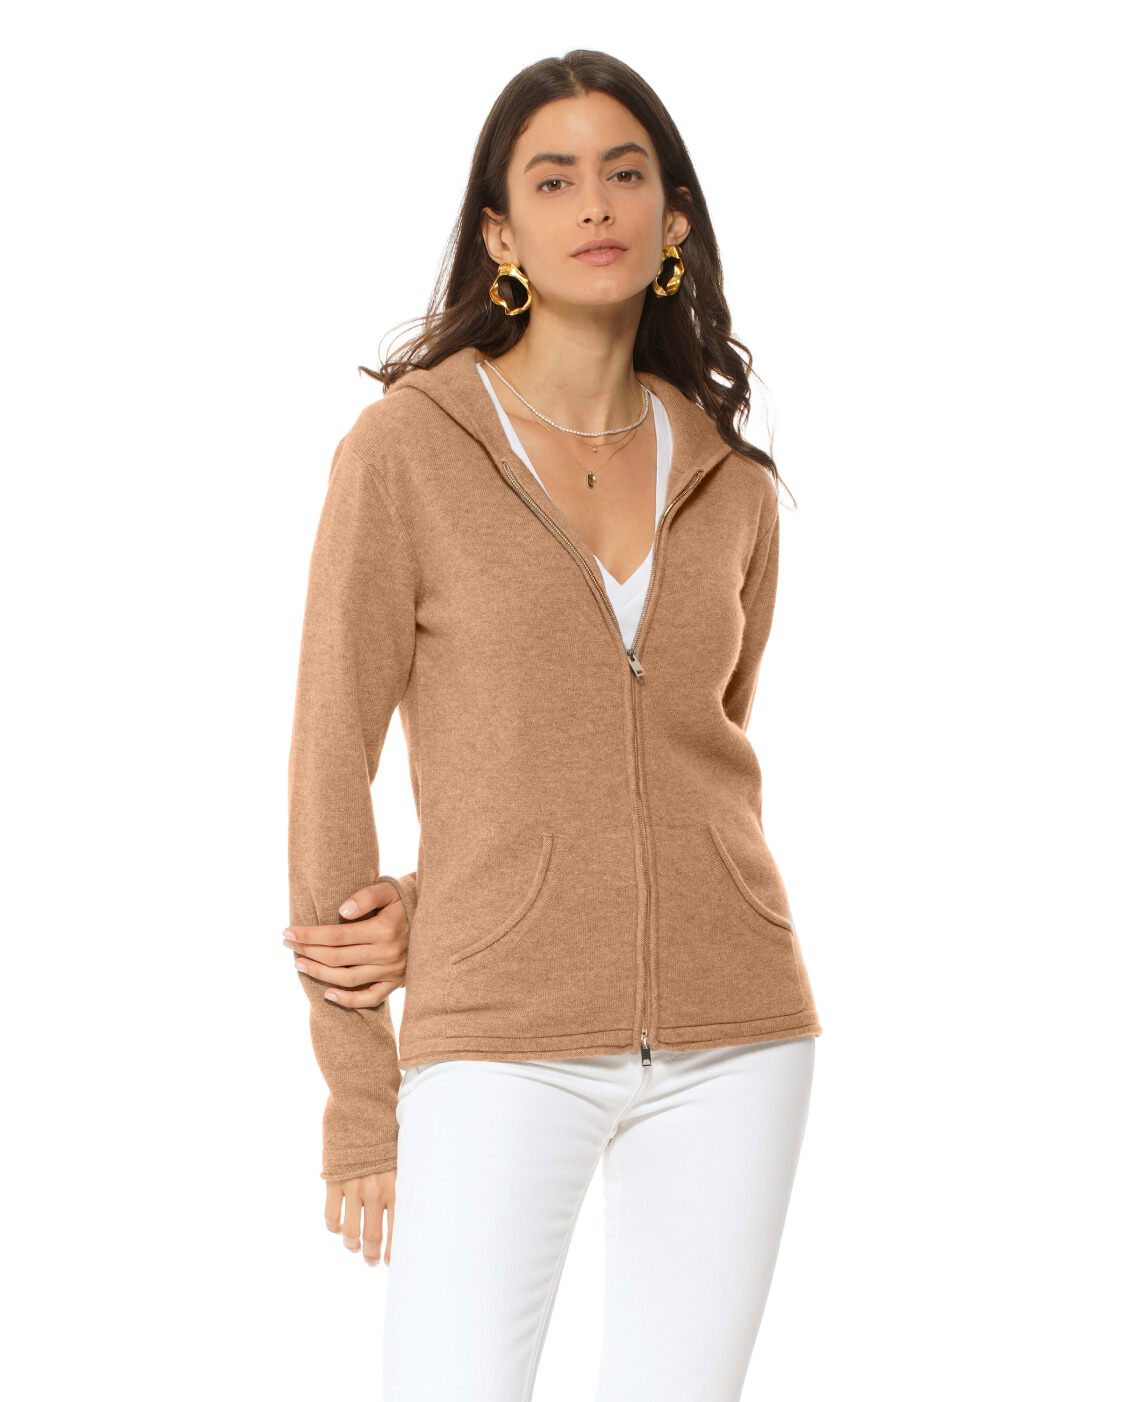 Monticelli Women's Pure Cashmere Hoodie Sweater Camel 1